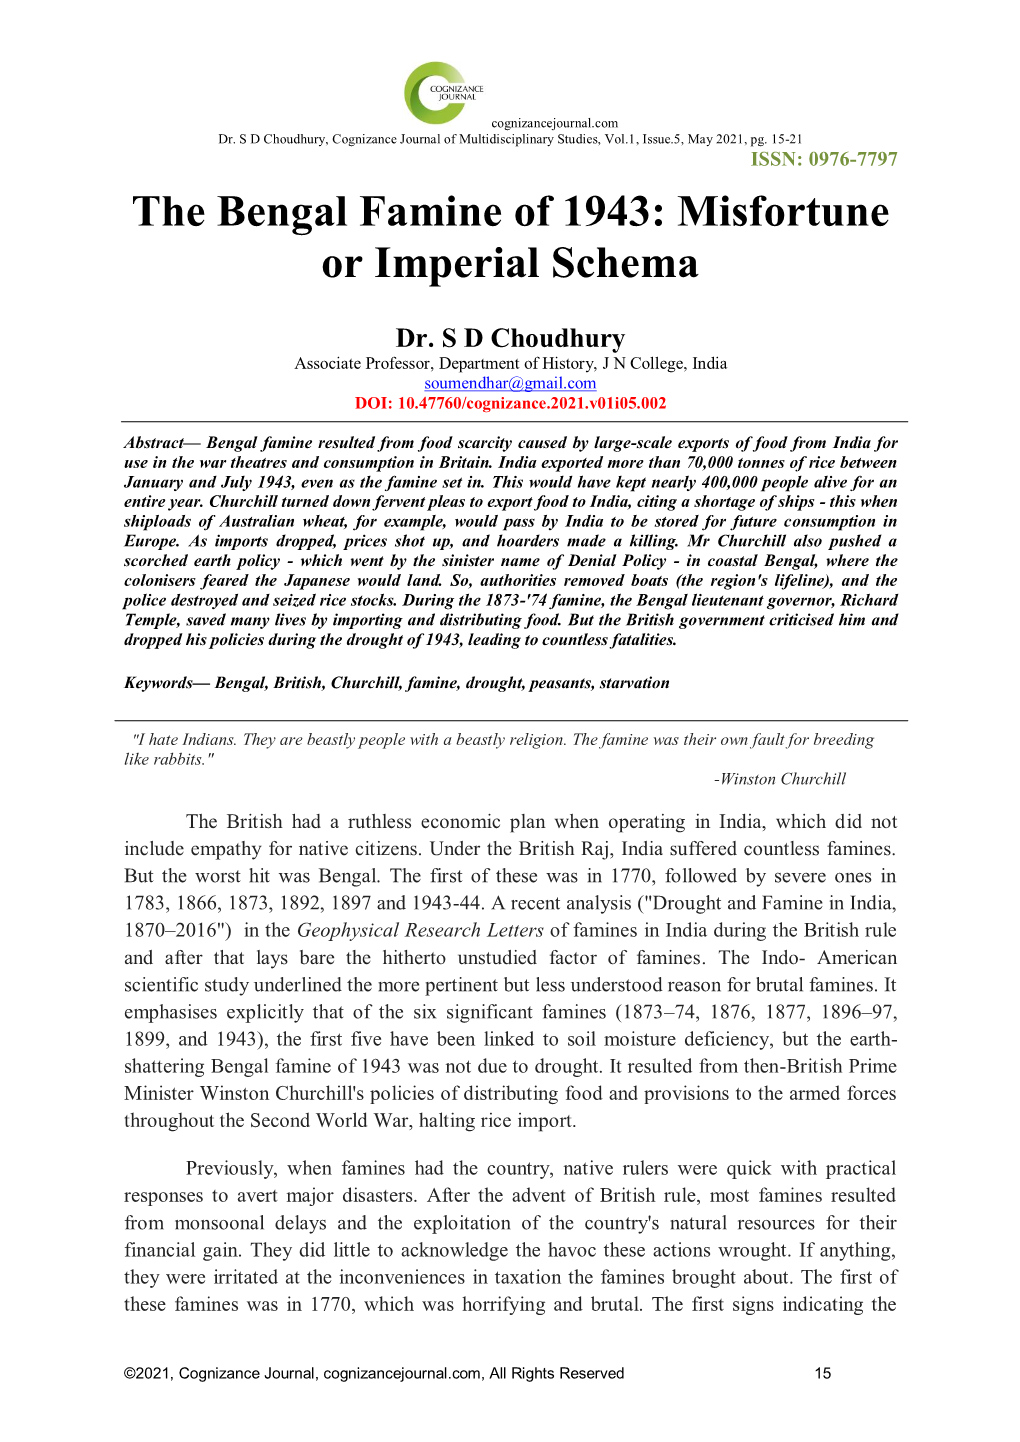 The Bengal Famine of 1943: Misfortune Or Imperial Schema